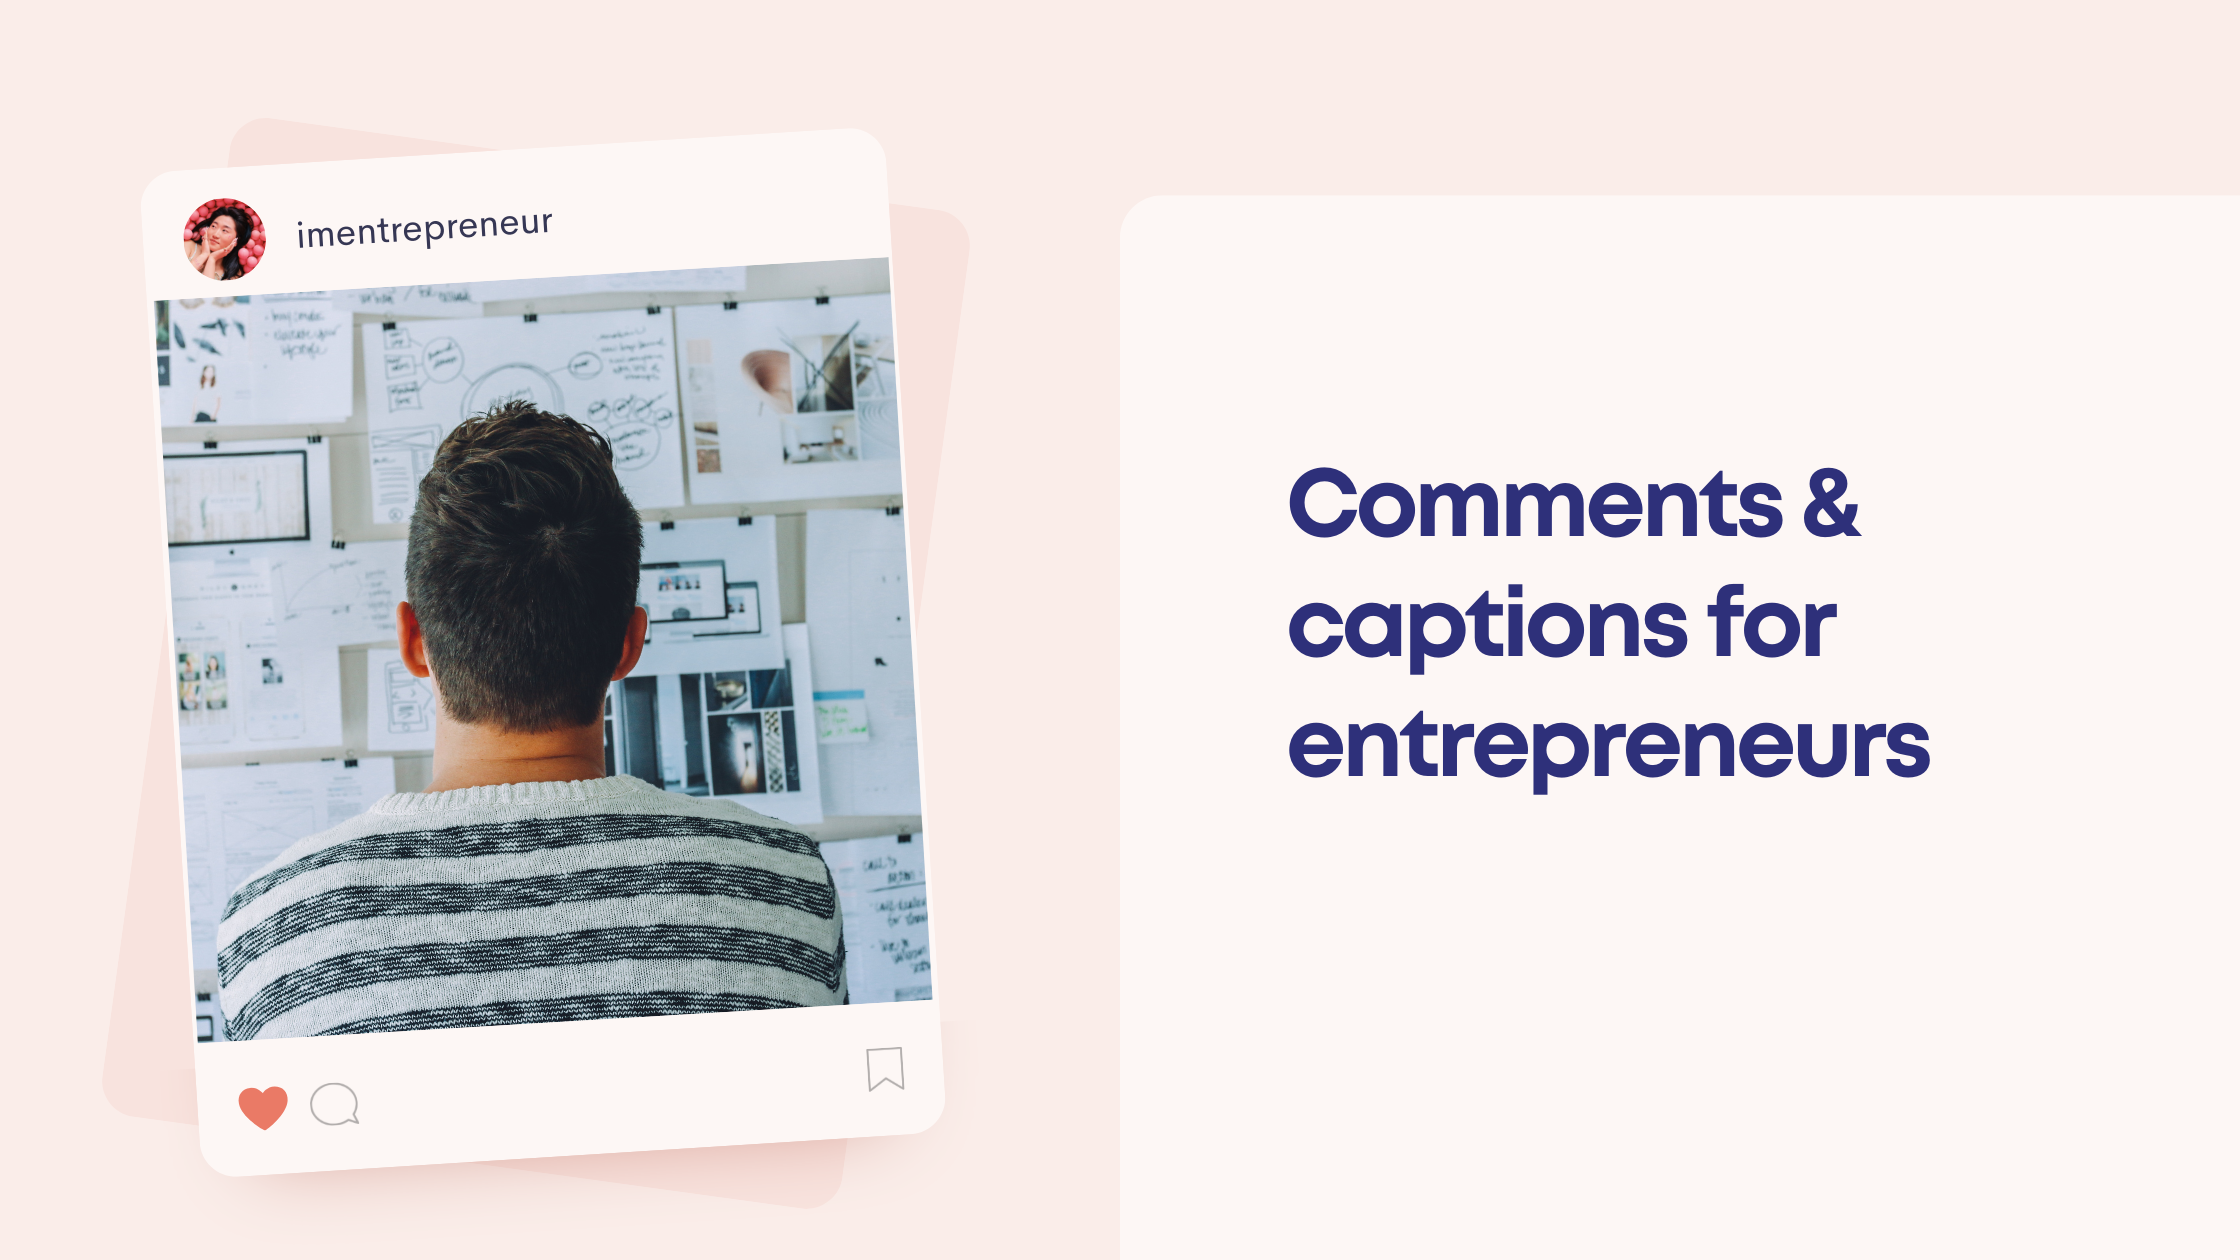 Remote.tools shares list of captions & comments for entrepreneurs